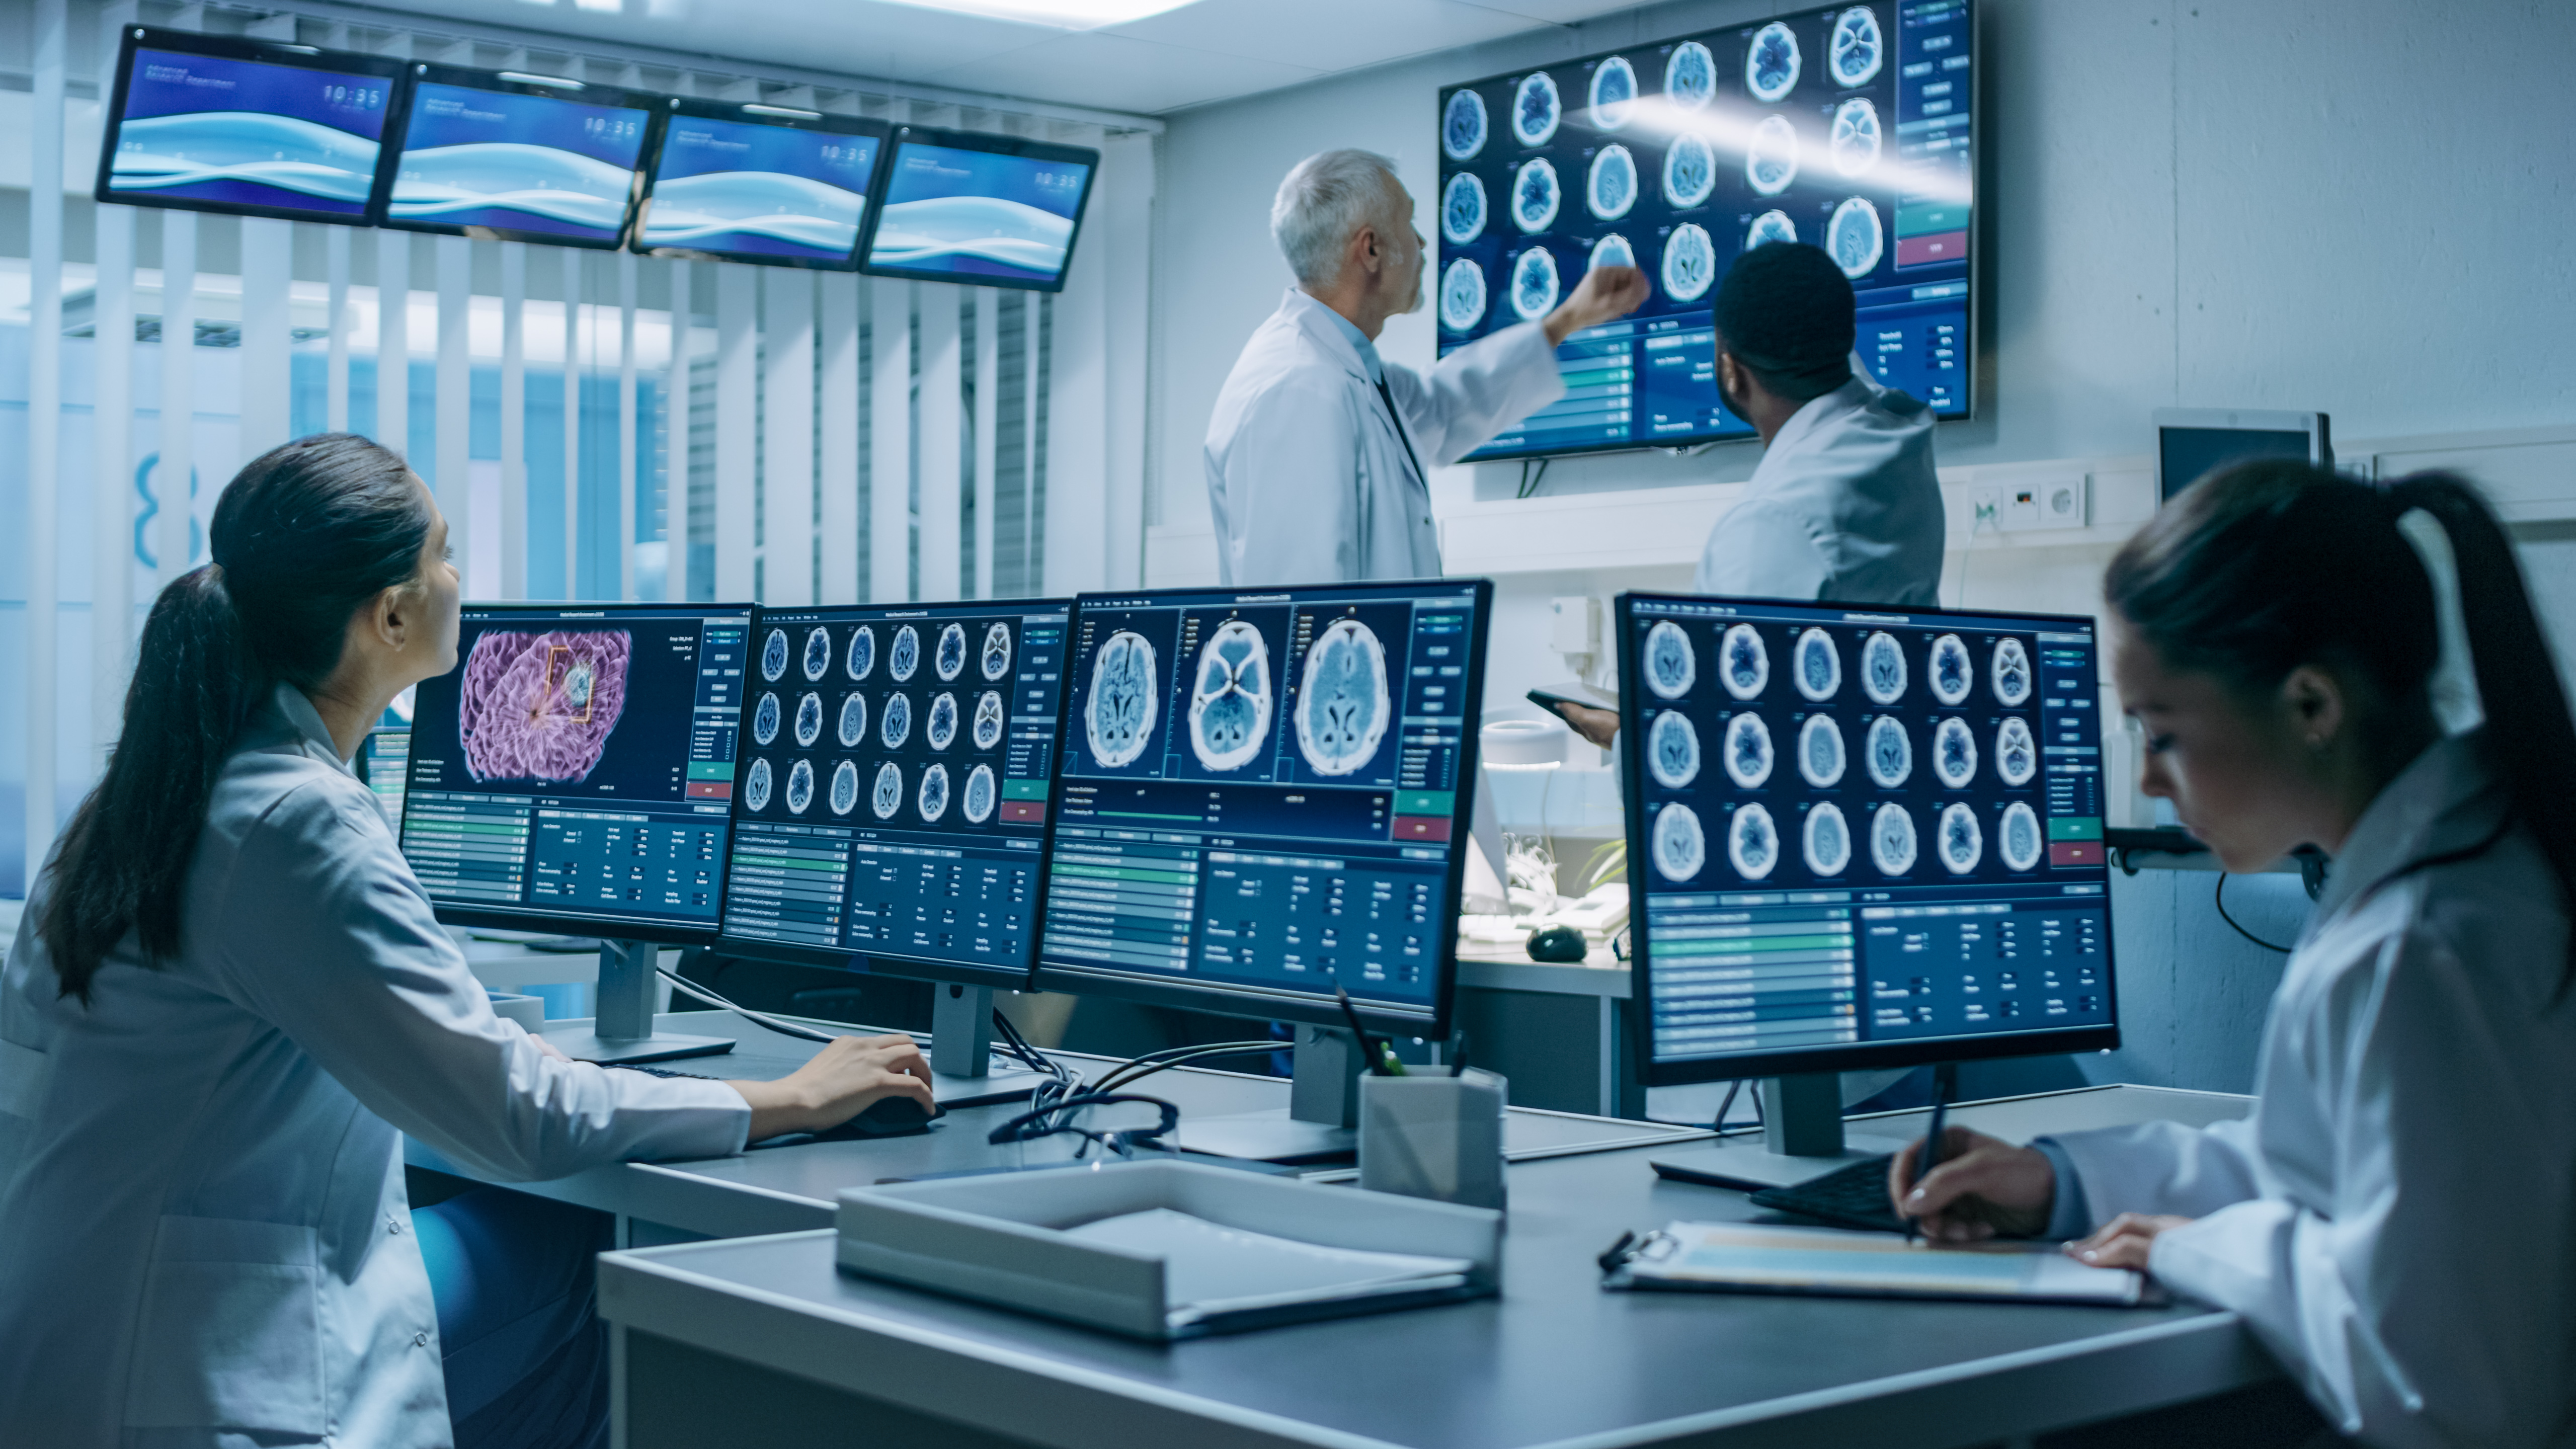 Neurologists / neuroscientists surrounded by monitors showing CT, MRI scans having discussions.